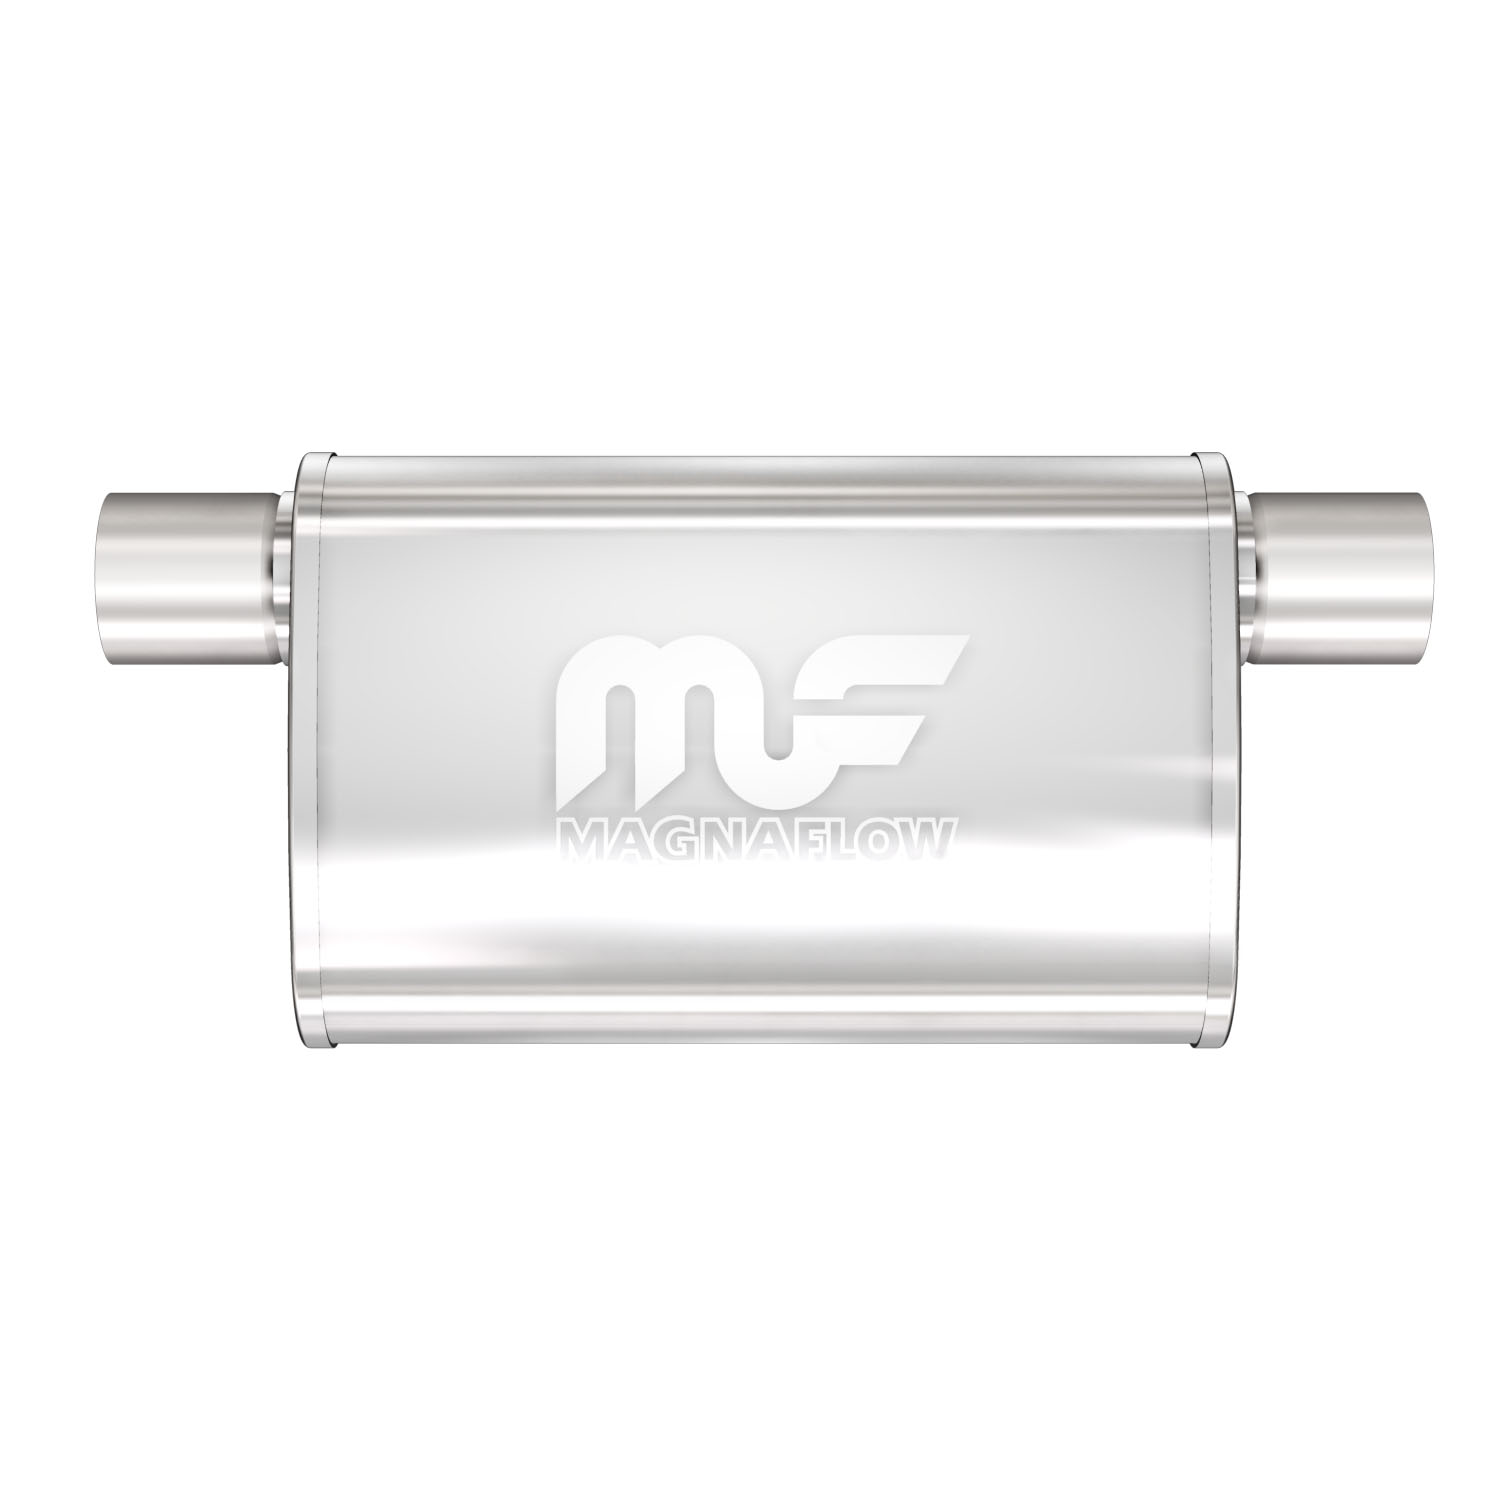 4" x 9" Oval Muffler Offset In/Offset Out: 2.25" Body Length: 11" Overall Length: 17" Core Size: 2.5" Polished Finish